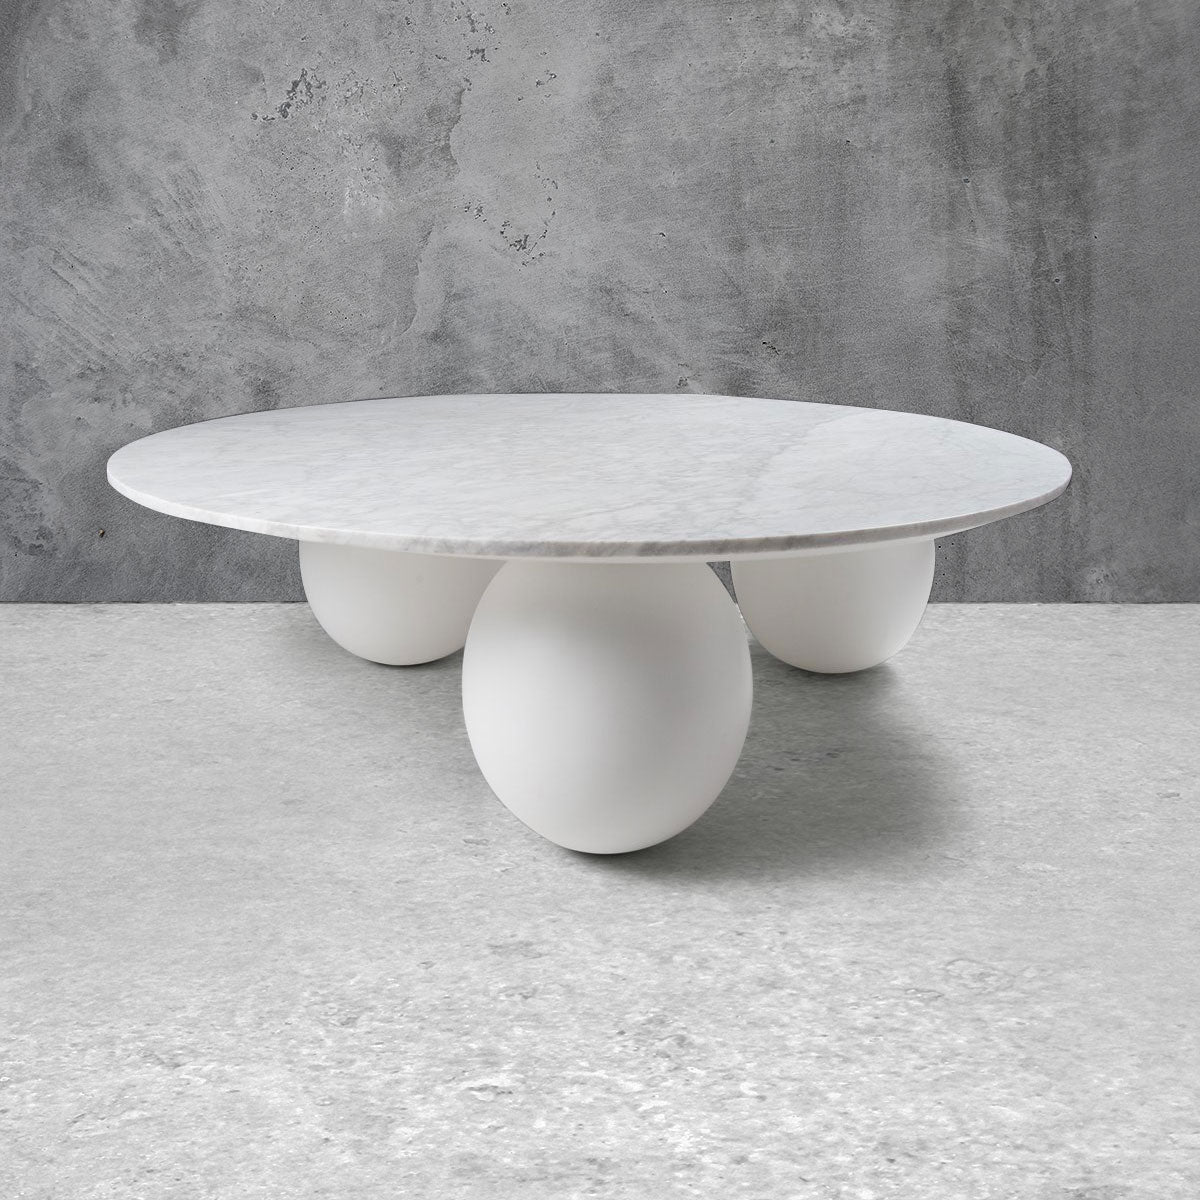 Modern round coffee table with three spherical legs in white and a light marble top.